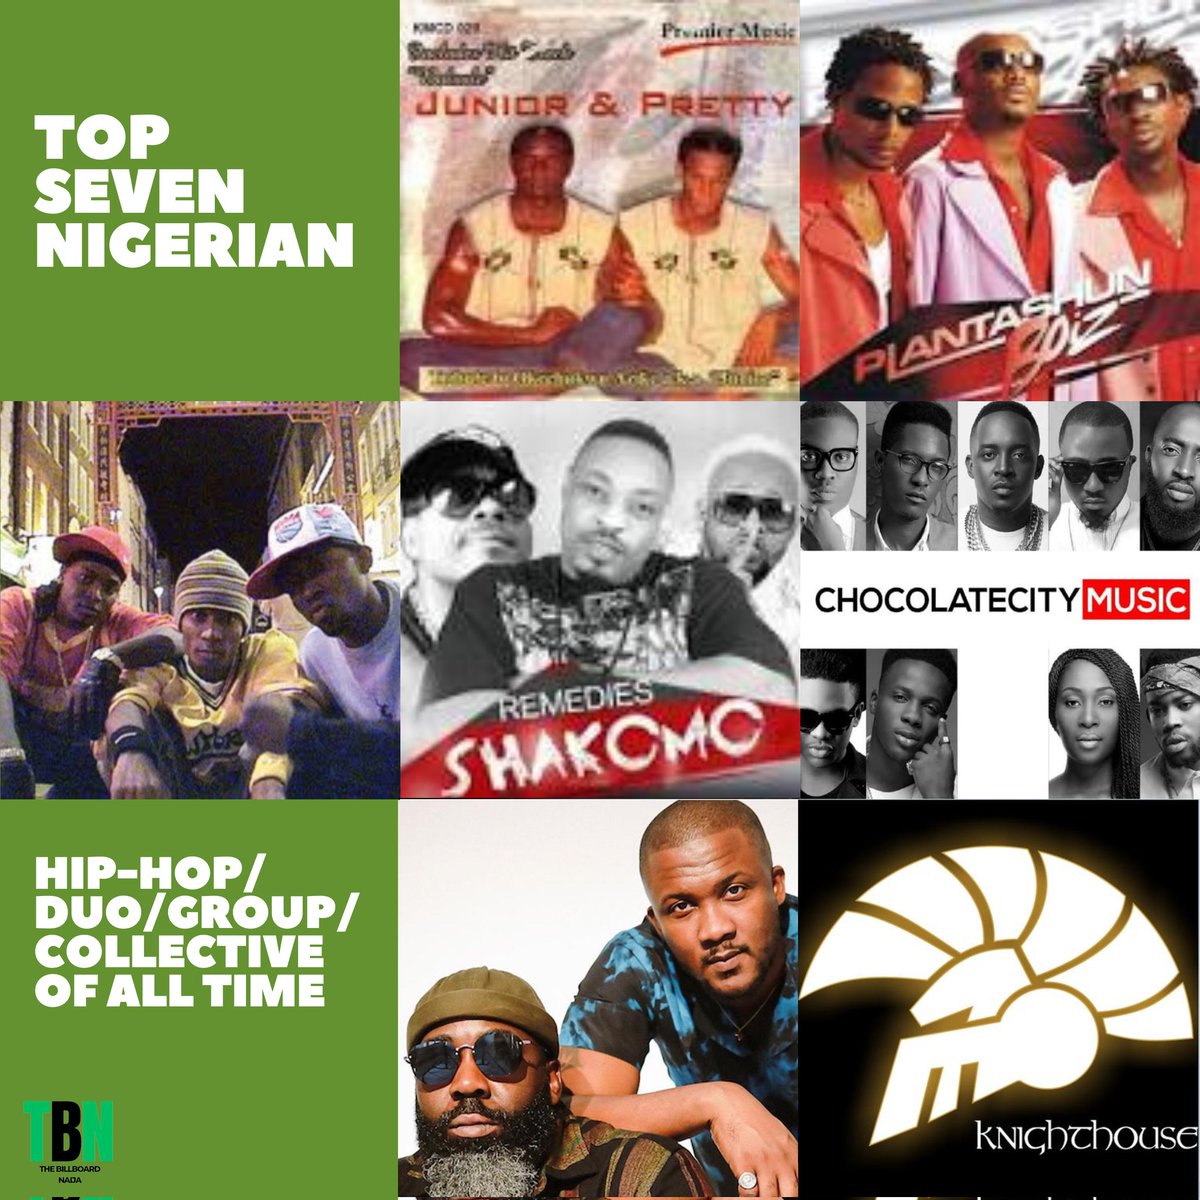 TOP SEVEN NIGERIAN HIP-HOP/ DUO/GROUP/COLLECTIVE OF ALL TIME 1. Junior and Pretty 2. Plantashun Boiz 3. Trybesmen 4. The Remedies 5. @choccitymusic 6. @ShowDemCamp 7. Knight House